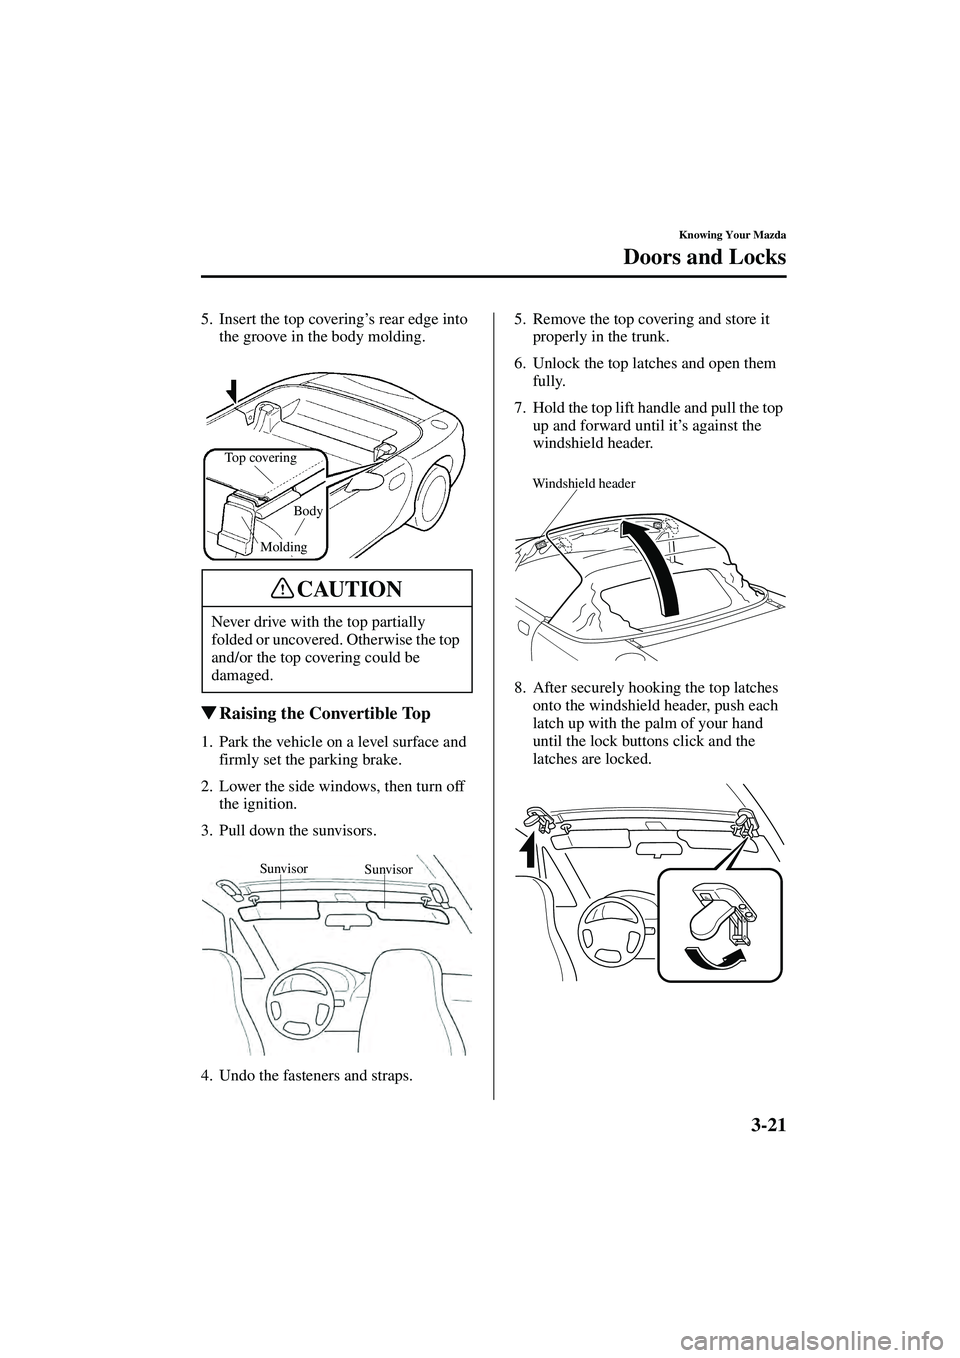 MAZDA MODEL MX-5 MIATA 2004 Workshop Manual 3-21
Knowing Your Mazda
Doors and Locks
Form No. 8S15-EA-03G
5. Insert the top covering’s rear edge into 
the groove in the body molding.
 Raising the Convertible Top
1. Park the vehicle on a level